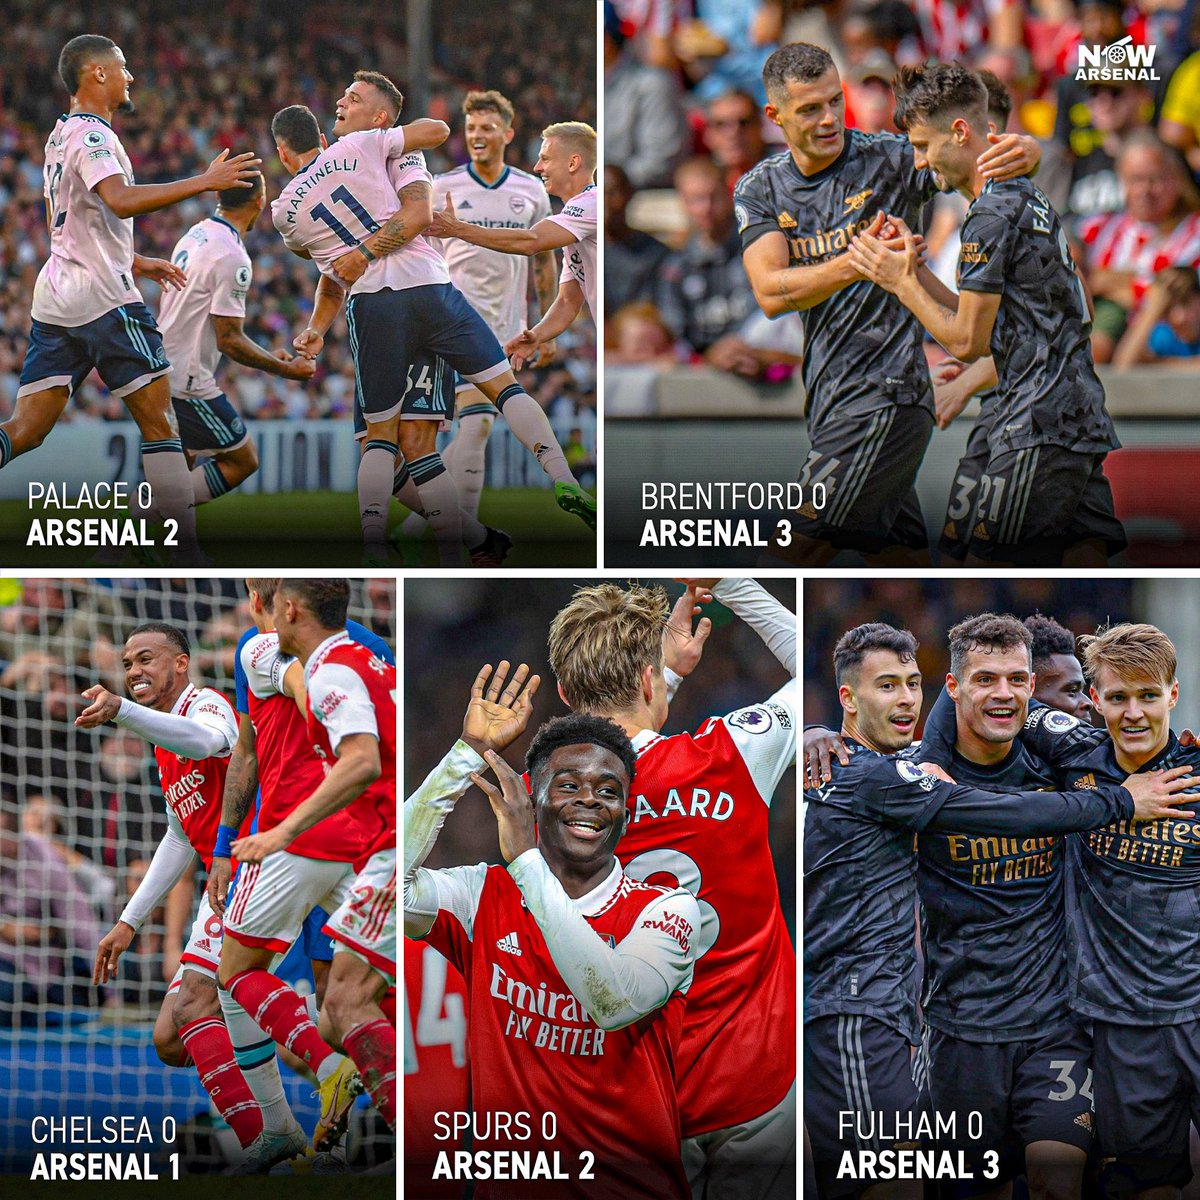 Arsenal become the first team in Premier League history to win five London derbies away from home in a row without conceding…

1️⃣ Crystal Palace 0-2 Arsenal 
2️⃣ Brentford 0-3 Arsenal 
3️⃣ Chelsea 0-1 Arsenal 
4️⃣ Spurs 0-2 Arsenal
5️⃣ Fulham 0-3 Arsenal

11 goals scored, 0 goals…